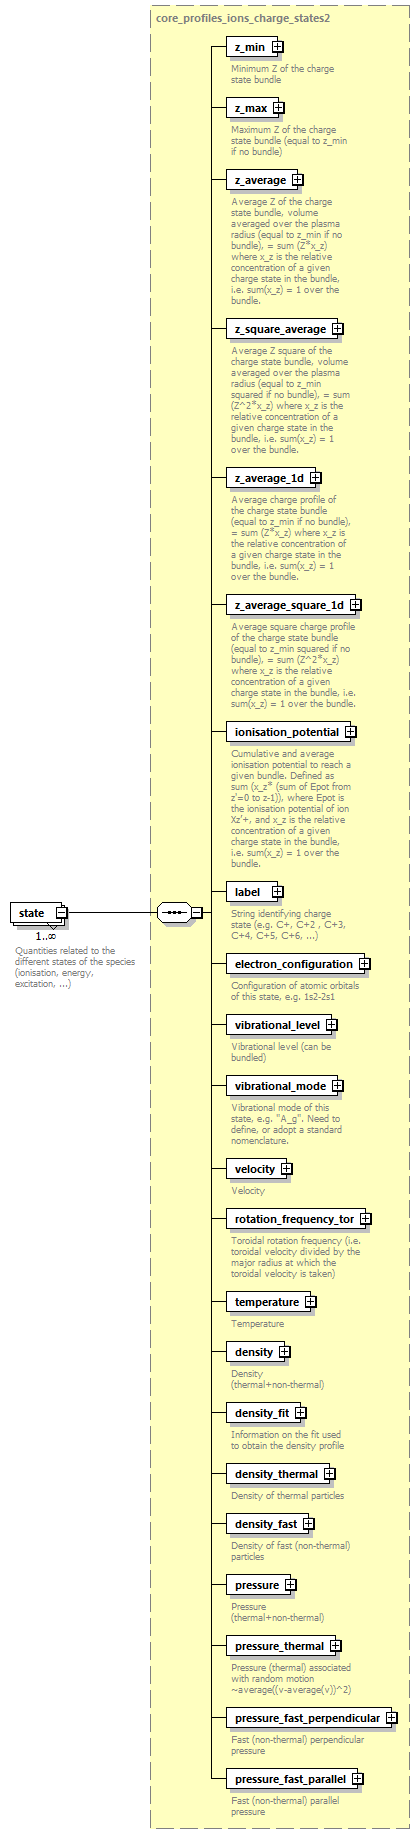 dd_data_dictionary.xml_p132.png